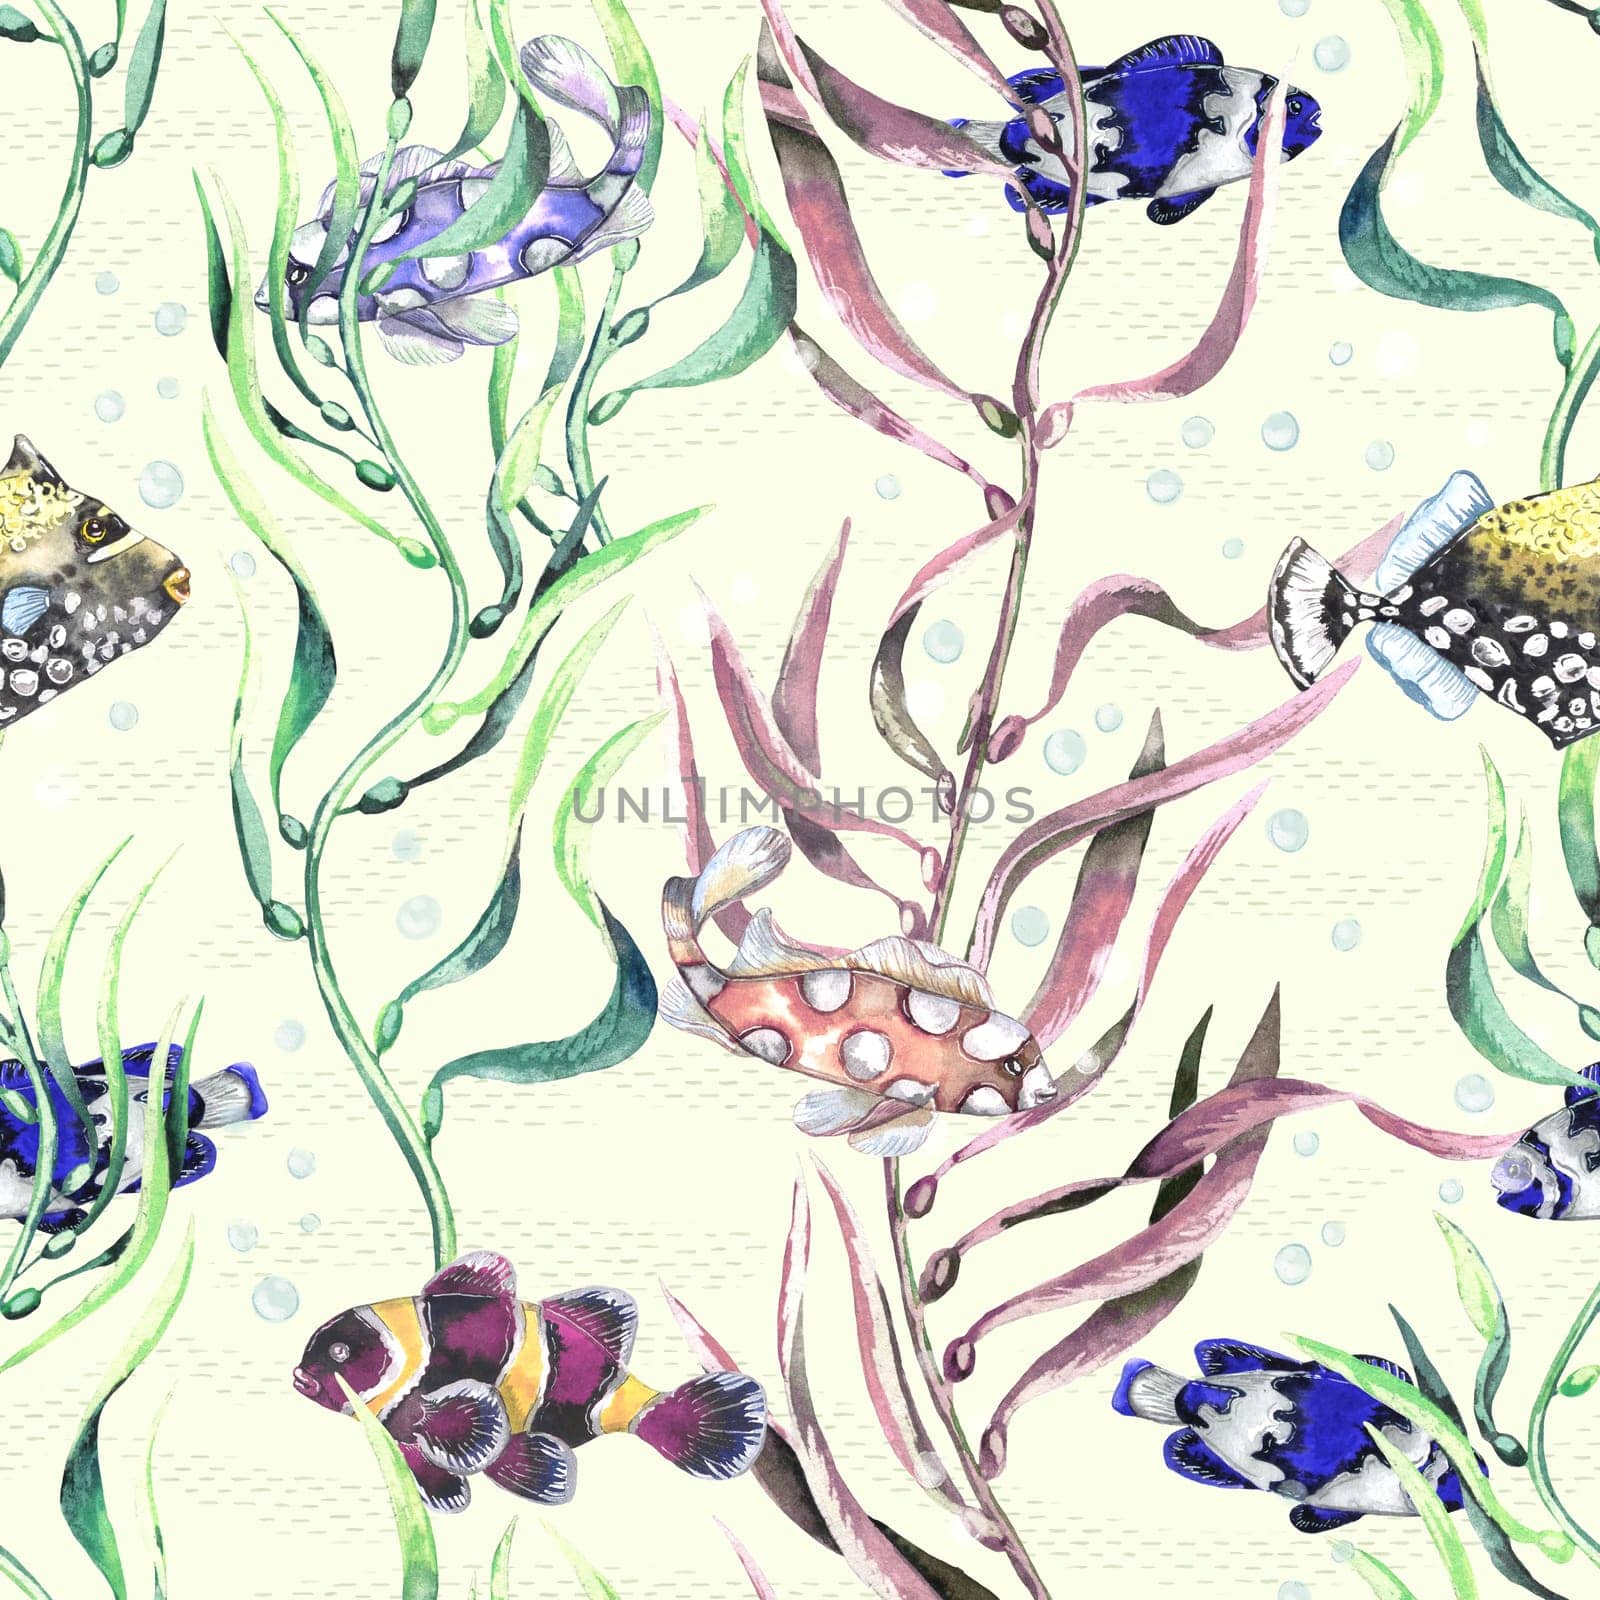 Watercolor stylish seamless pattern with fishes and seaweeds. Hand drawn illustration